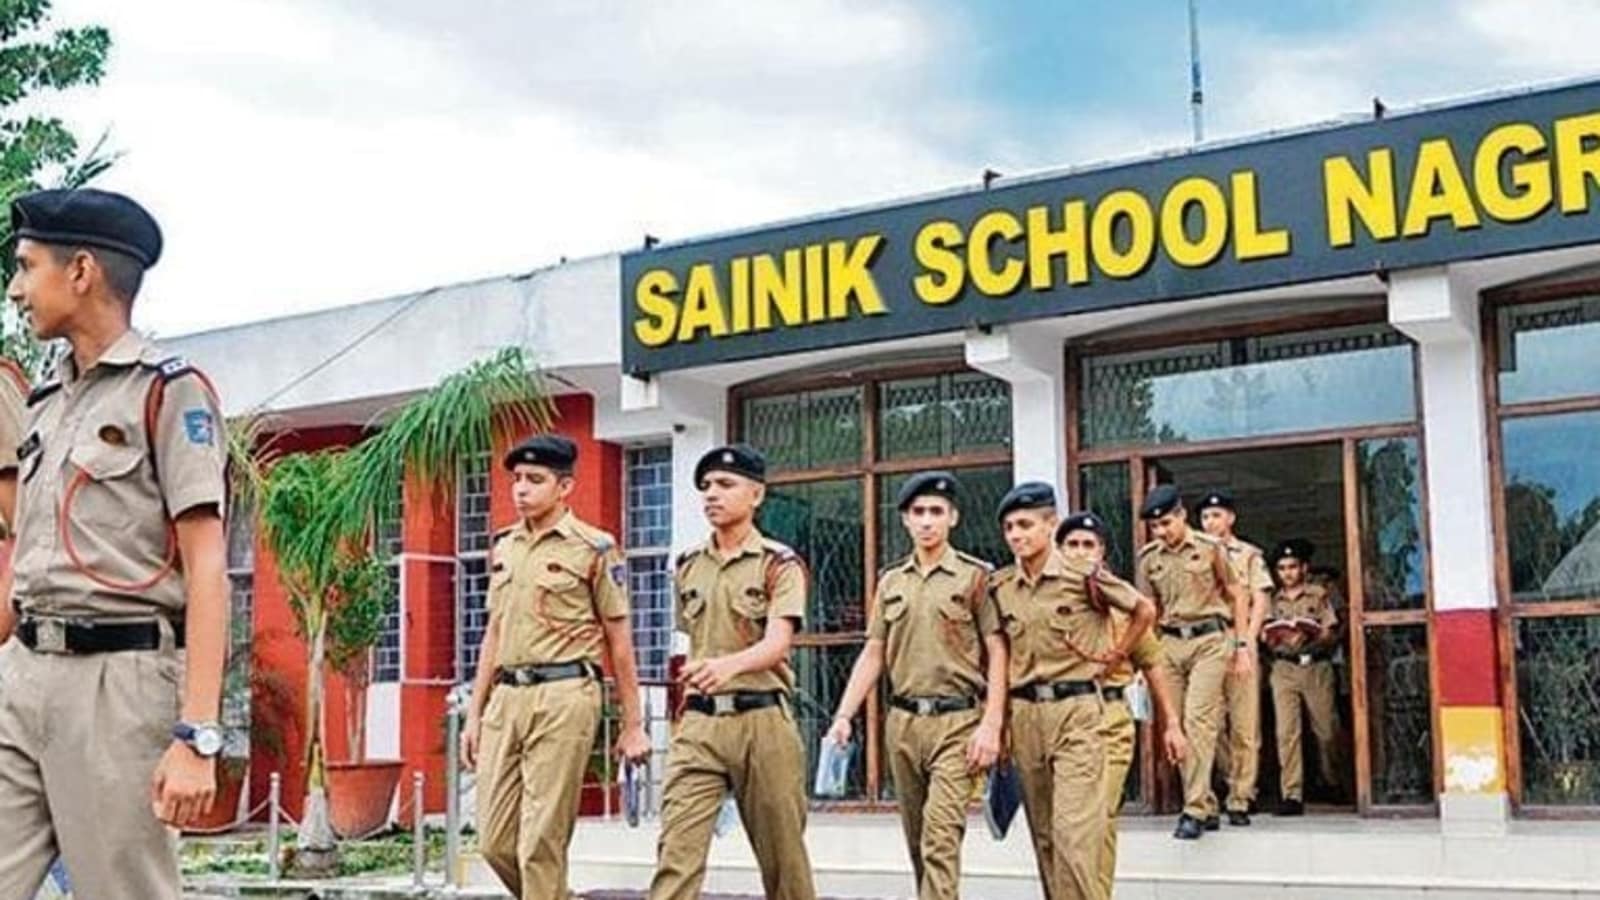 Sainik Schools now open for girls as well: All you need to know | Latest News India - Hindustan Times